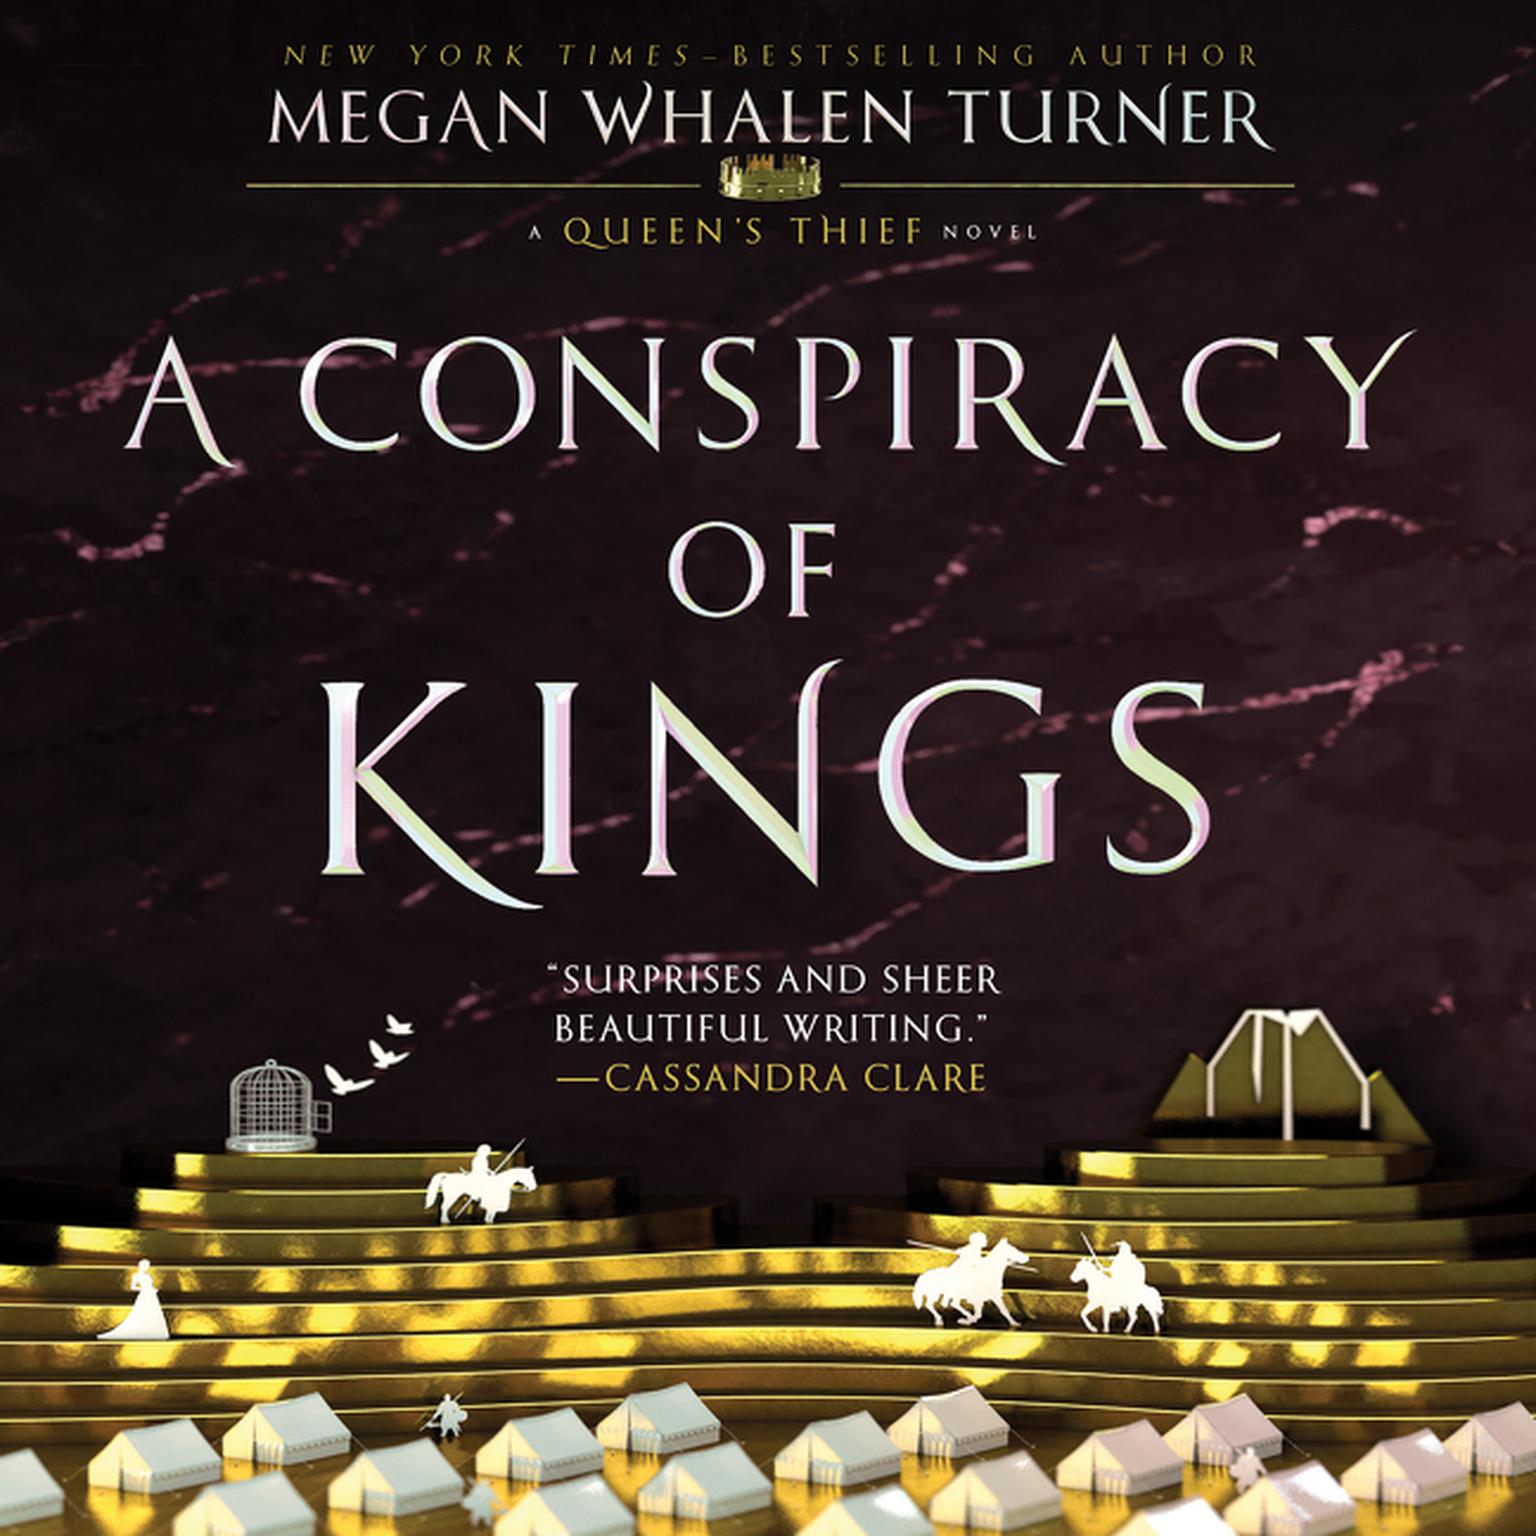 A Conspiracy of Kings: A Queen’s Thief Novel Audiobook, by Megan Whalen Turner